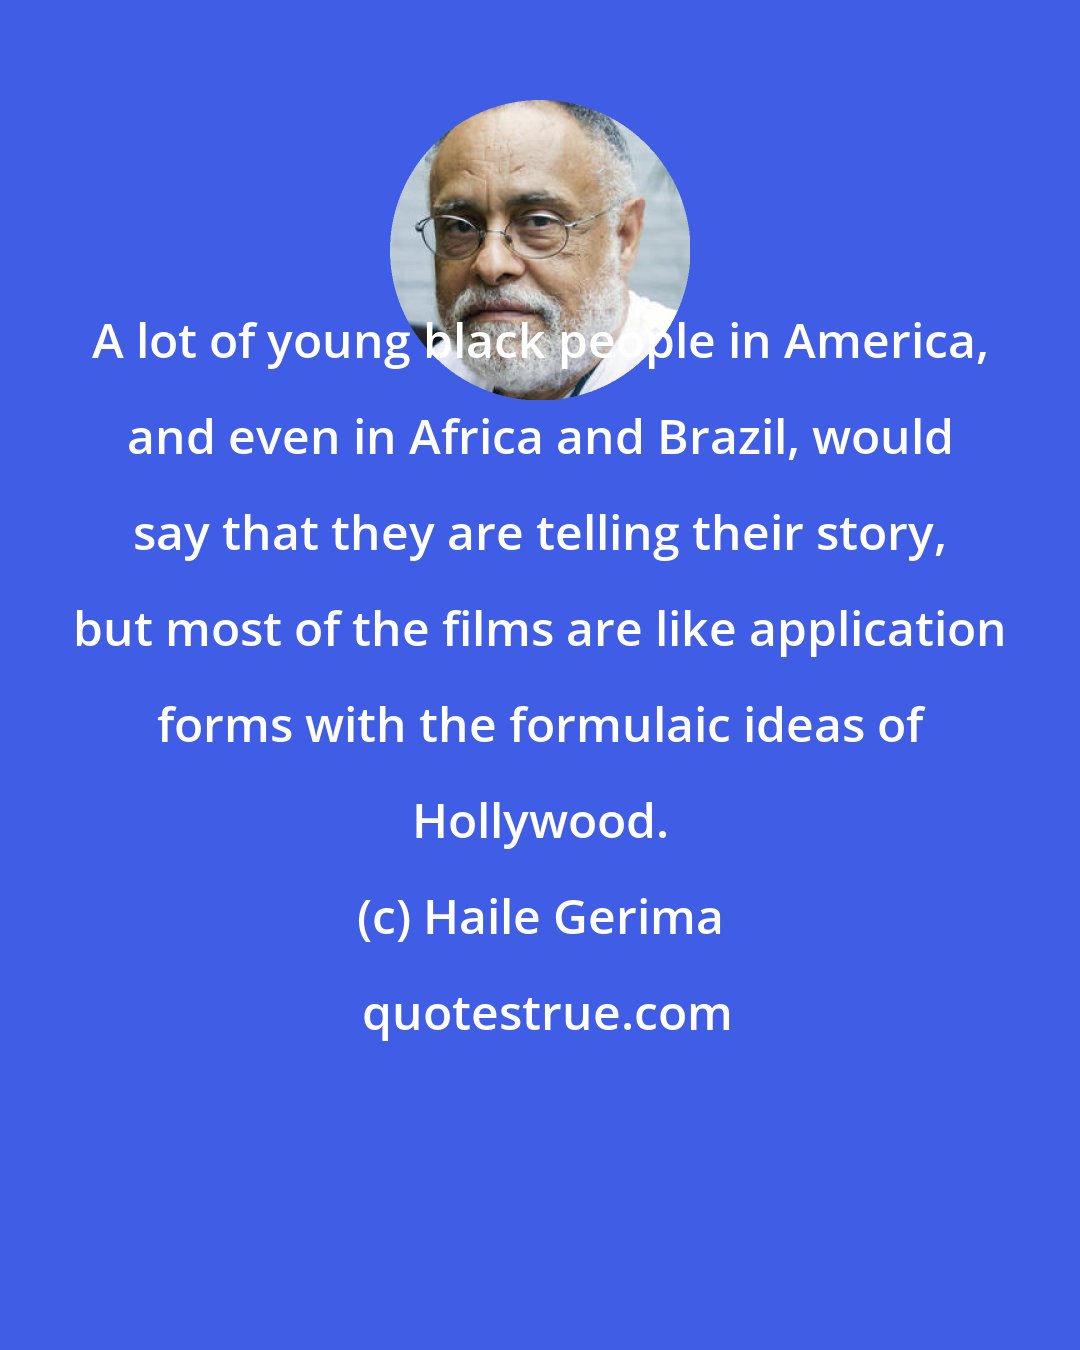 Haile Gerima: A lot of young black people in America, and even in Africa and Brazil, would say that they are telling their story, but most of the films are like application forms with the formulaic ideas of Hollywood.